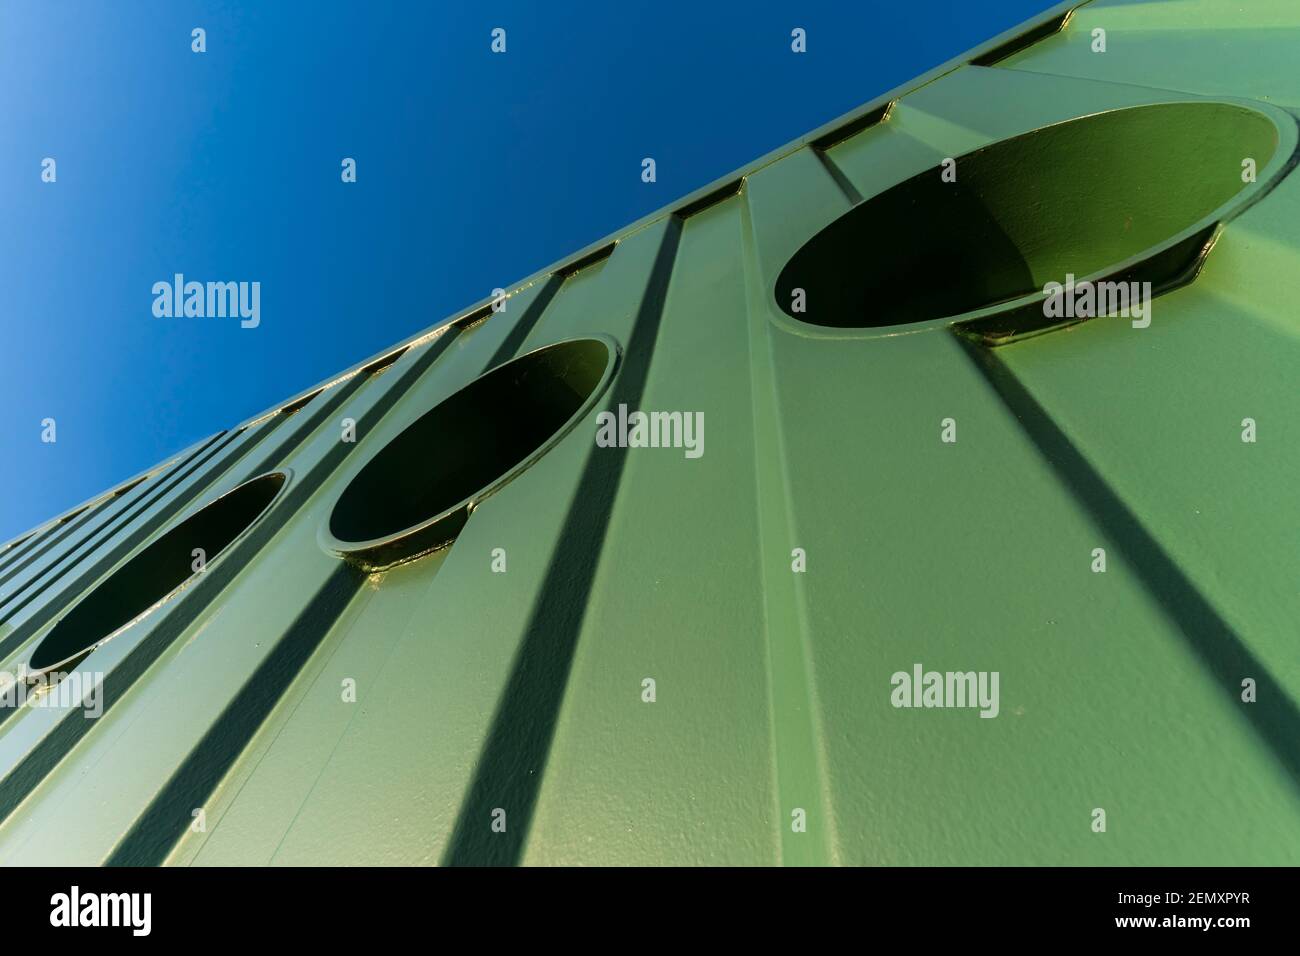 abstract view of a steel container facade Stock Photo